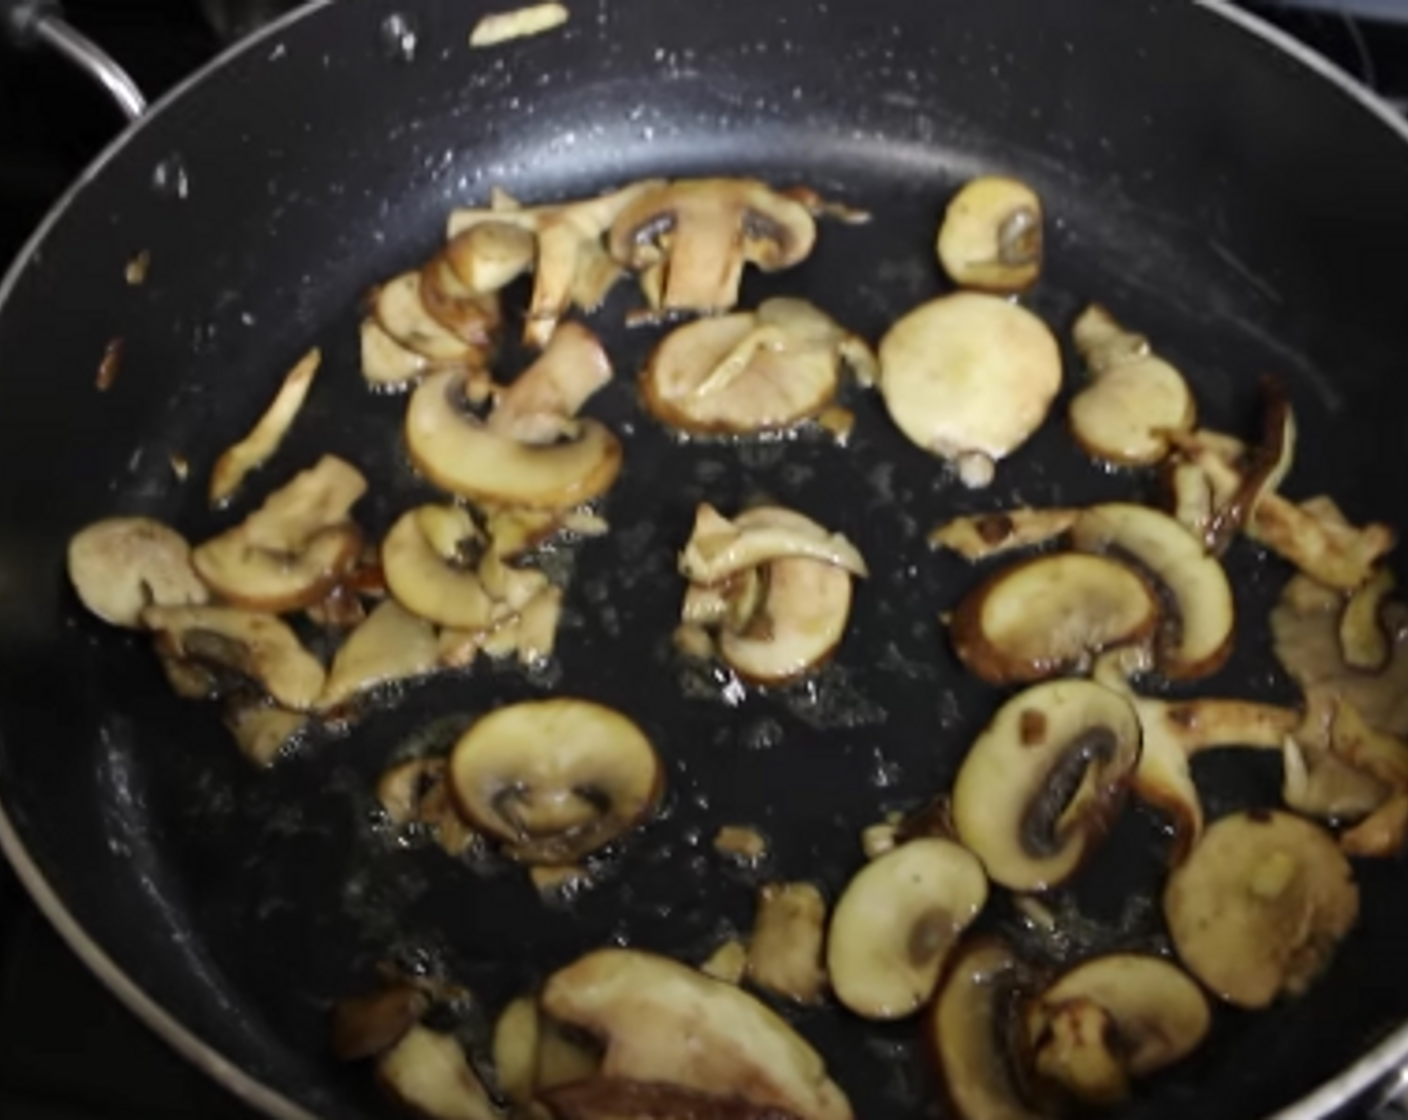 step 4 Sauté the Mushrooms (2 1/4 cups) in Olive Oil (1 Tbsp) for 3 minutes and add Fresh Baby Spinach (2 cups). Cook the spinach just until wilted.